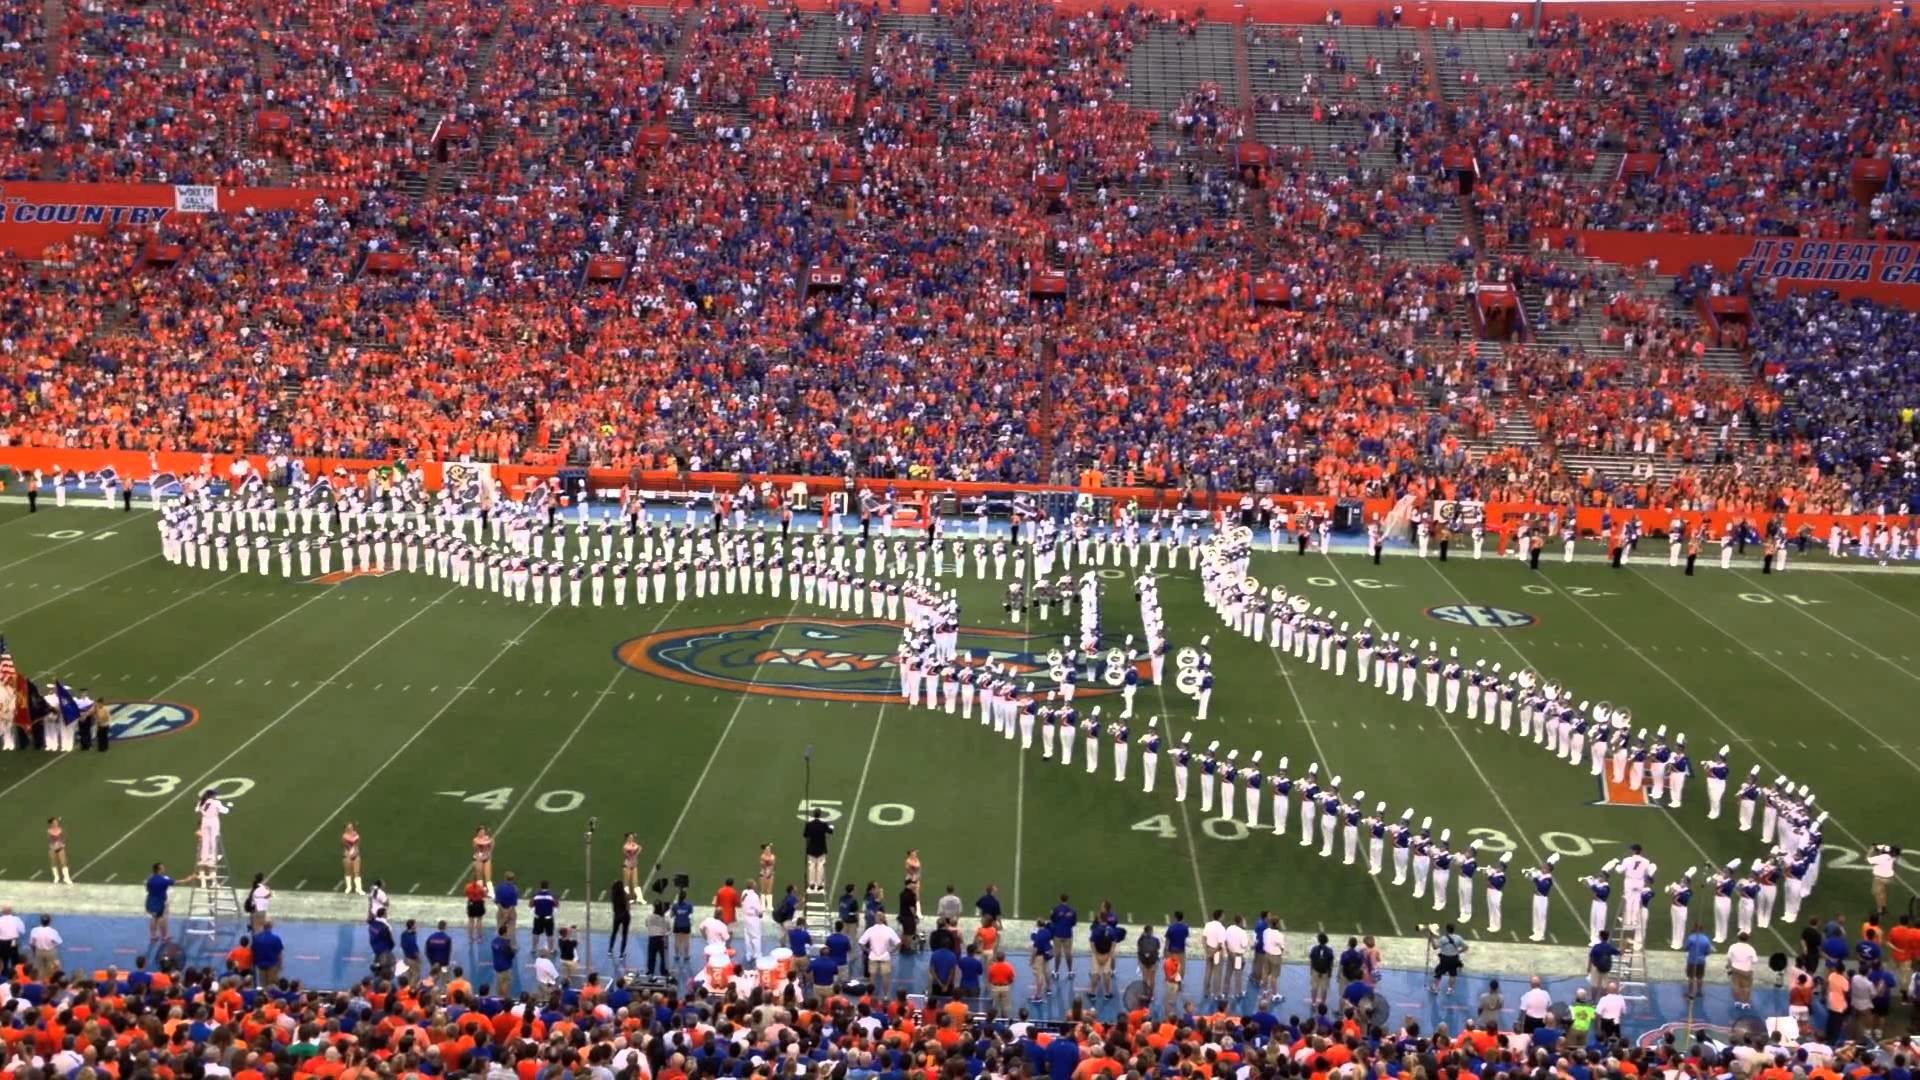 University of Florida – UF Marching Band 9/13/14 – Pre game Part 2 of 5